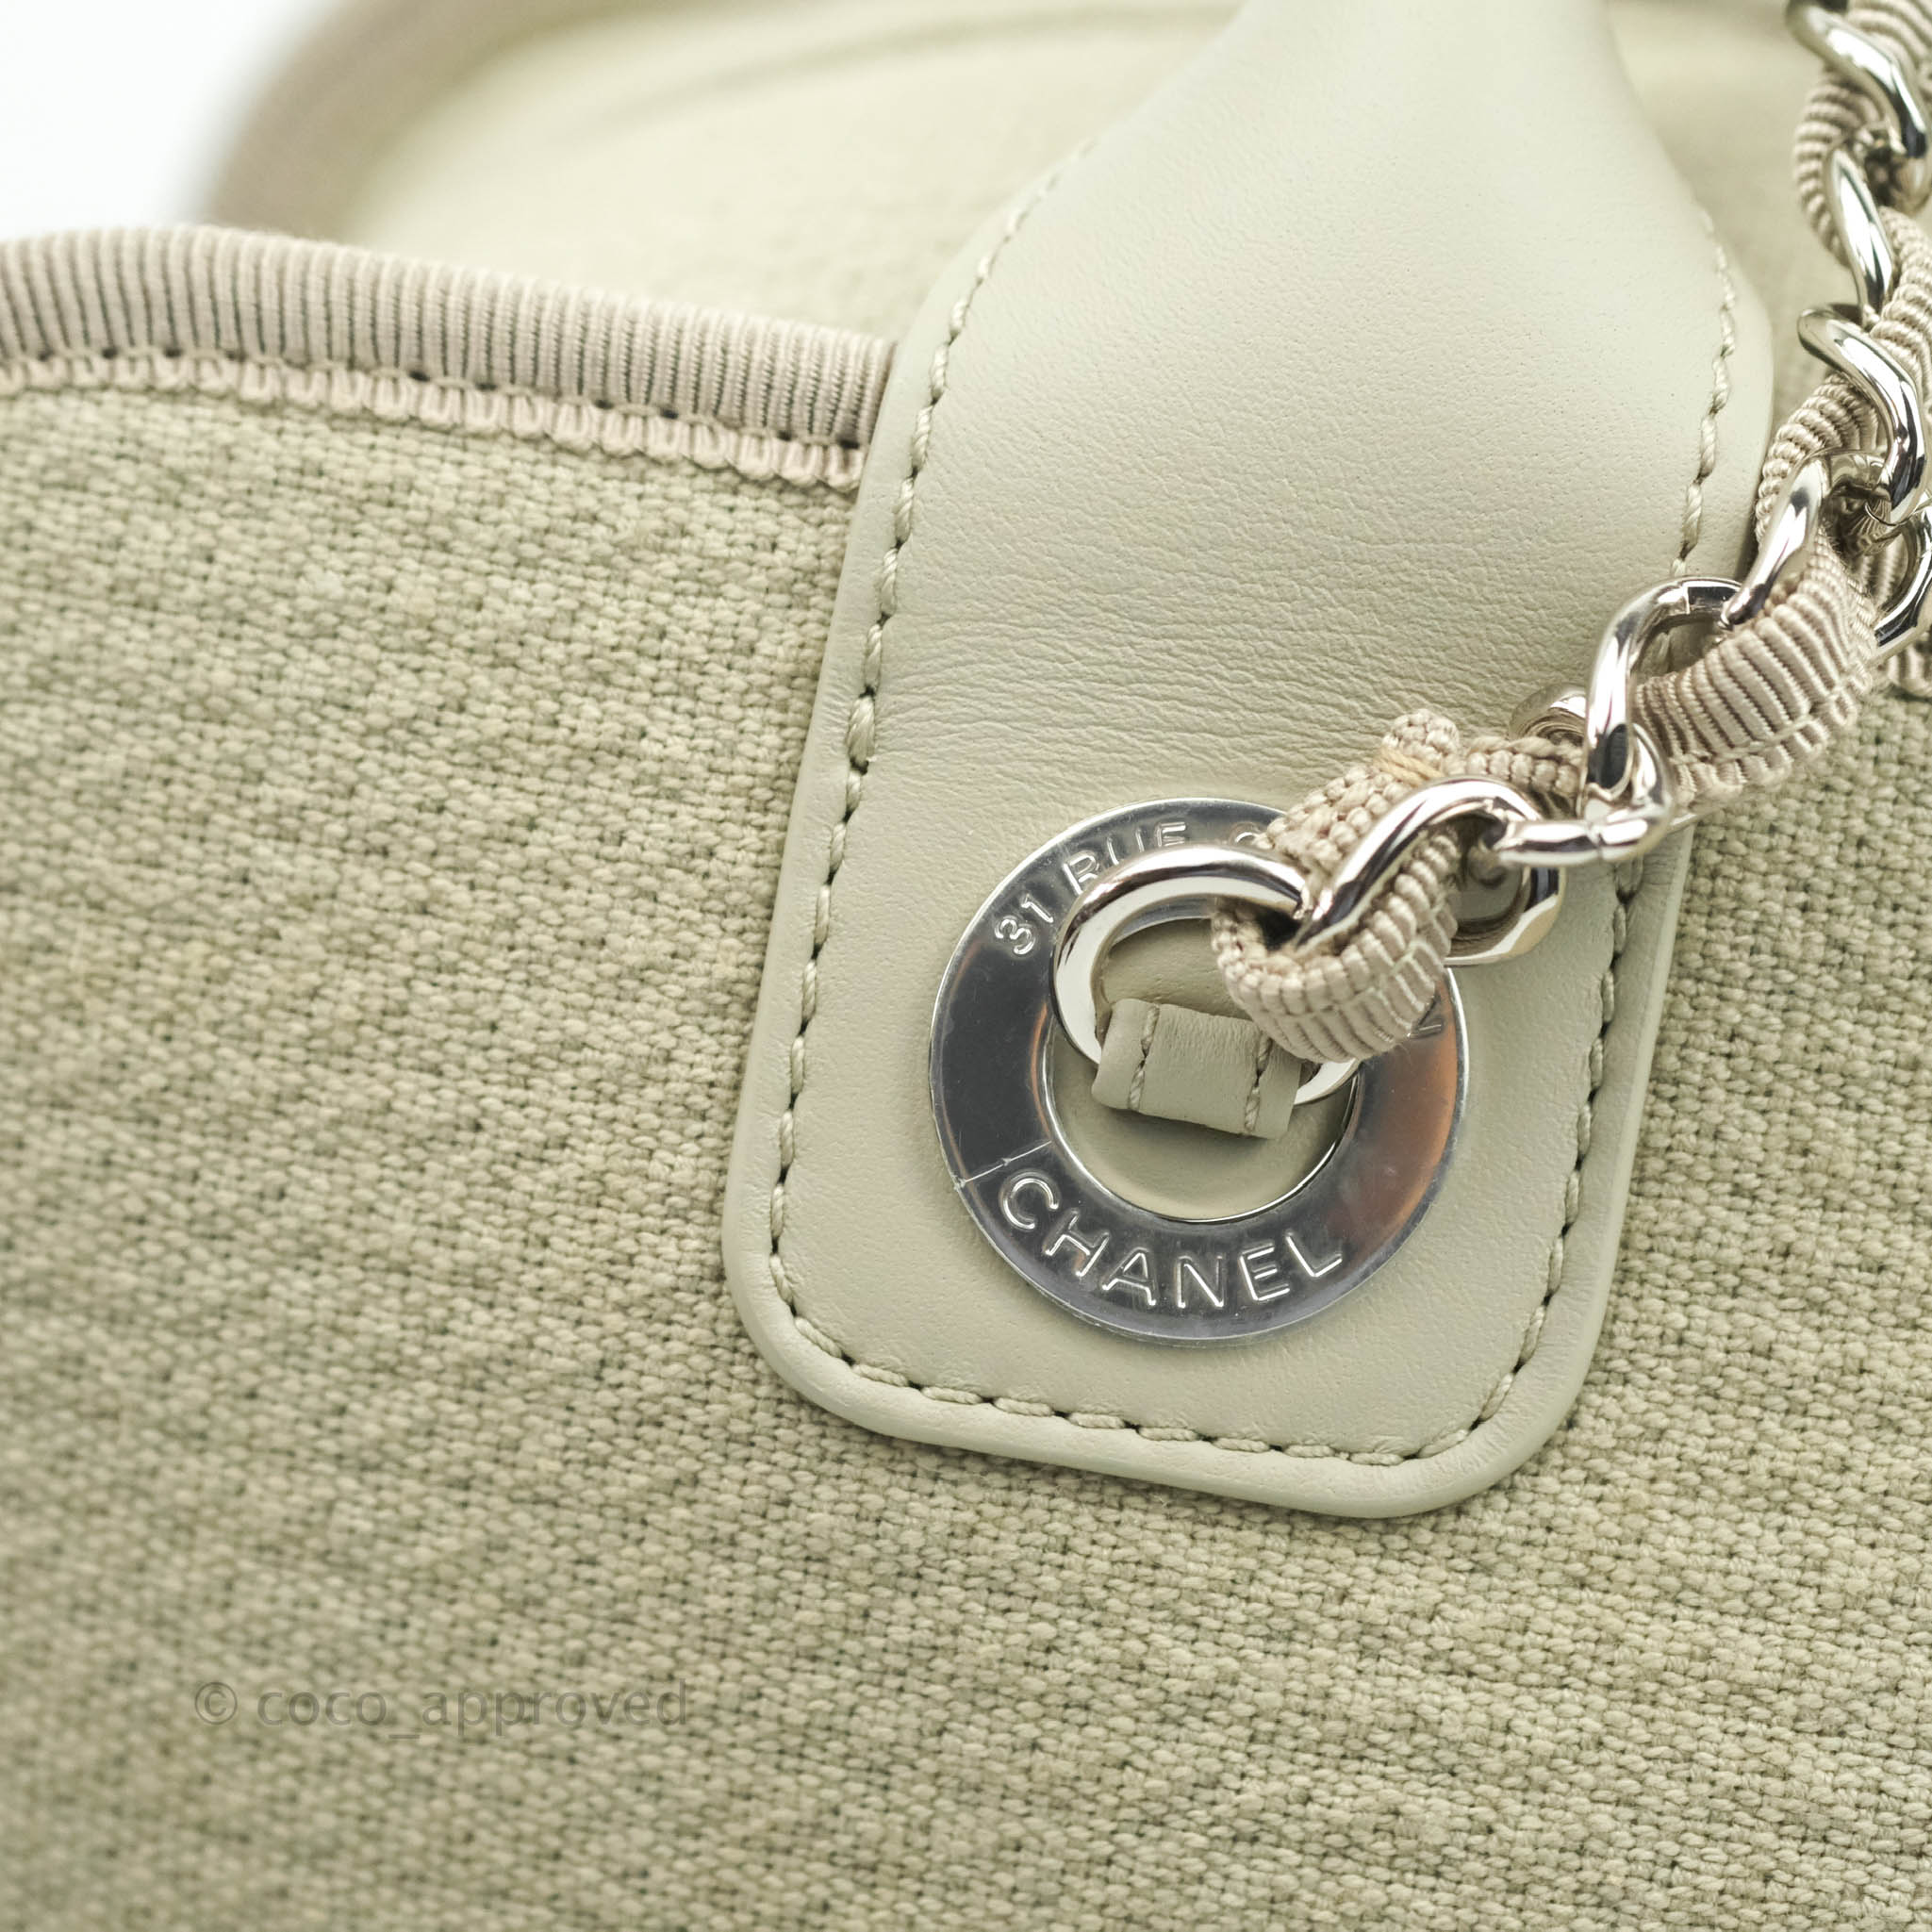 Chanel Deauville Bowling Bag Grey Silver Hardware – Coco Approved Studio